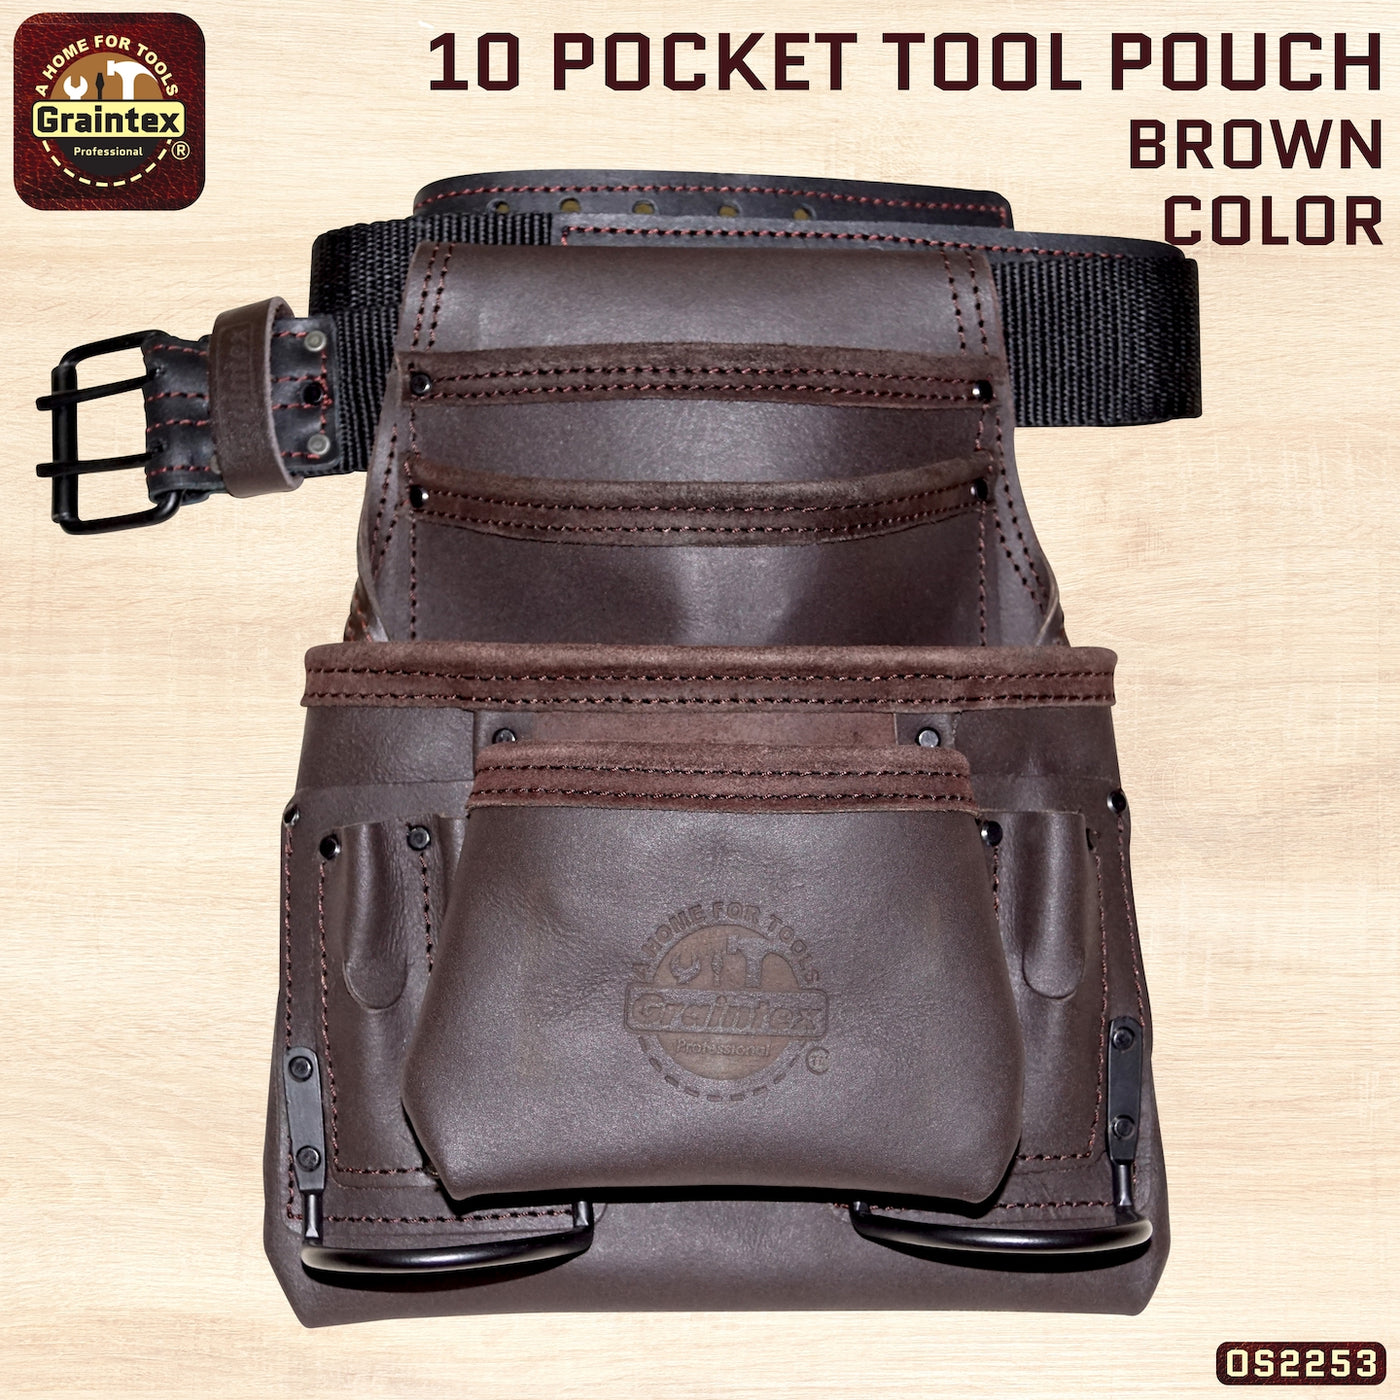 OS2253 :: 10 Pocket Nail & Tool Pouch Oil Tanned Leather with 2" Belt